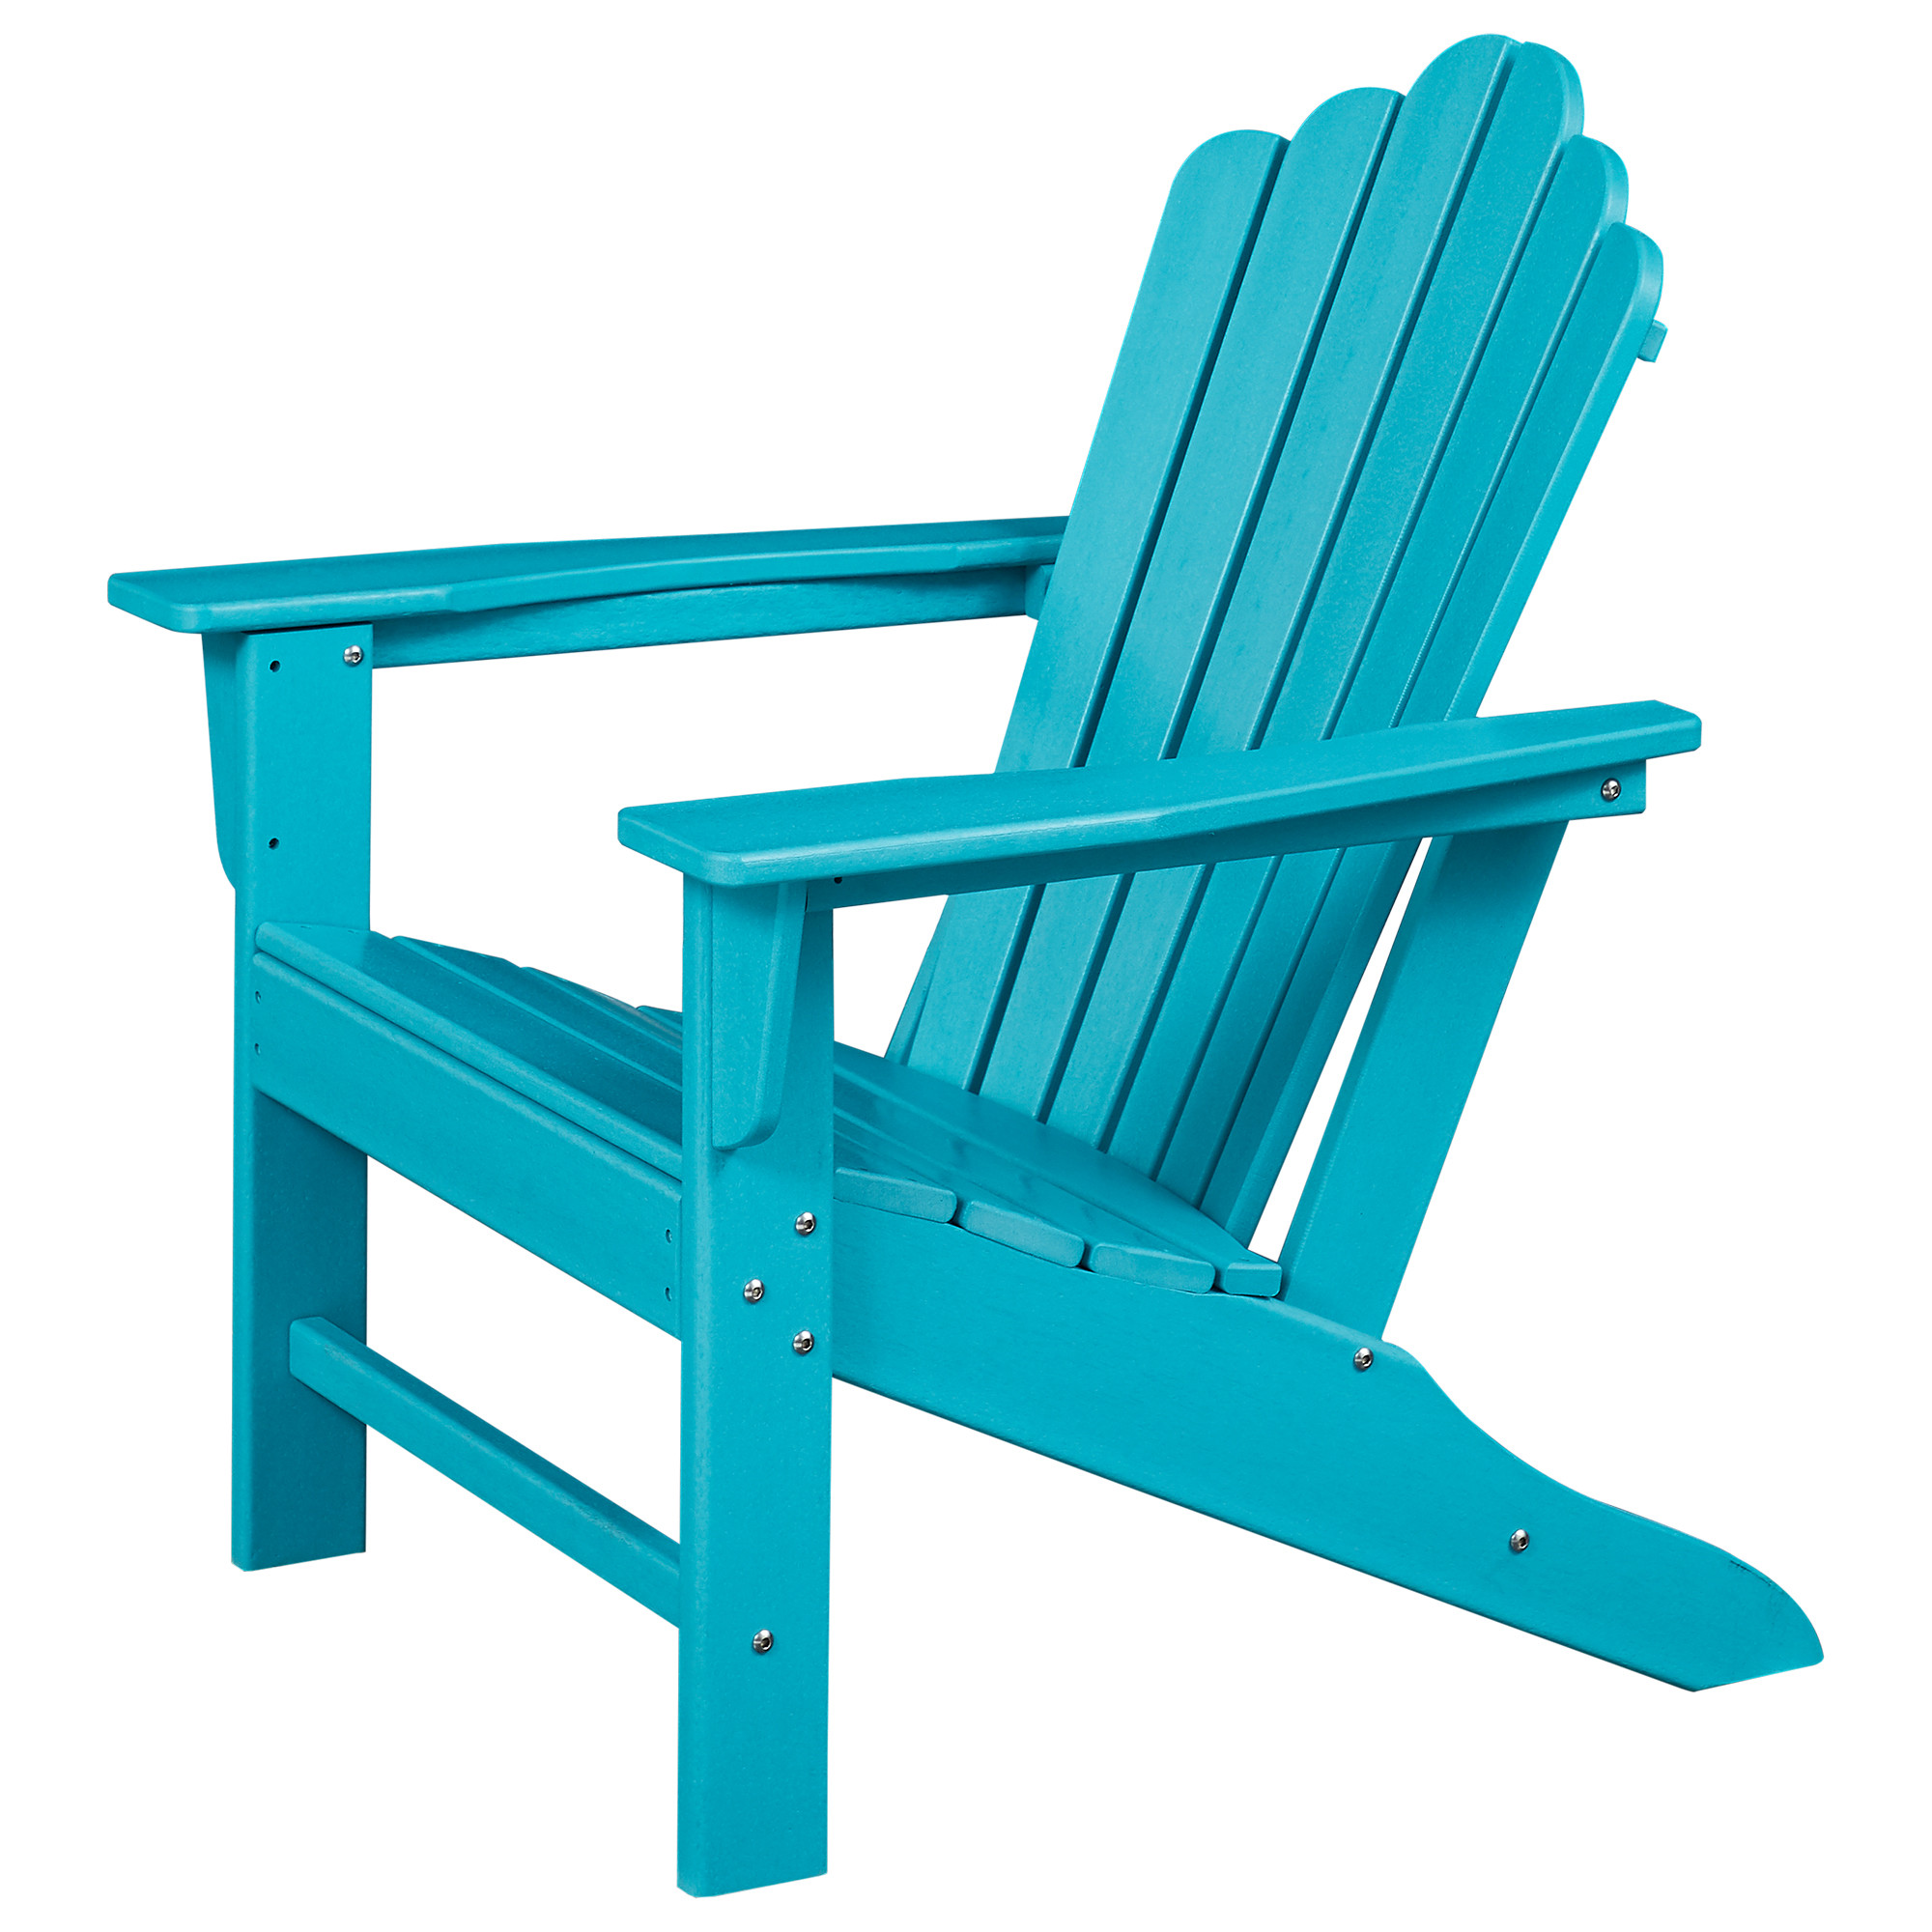 HDPE hard plastic classic outdoor Adirondack chair (without cup holder